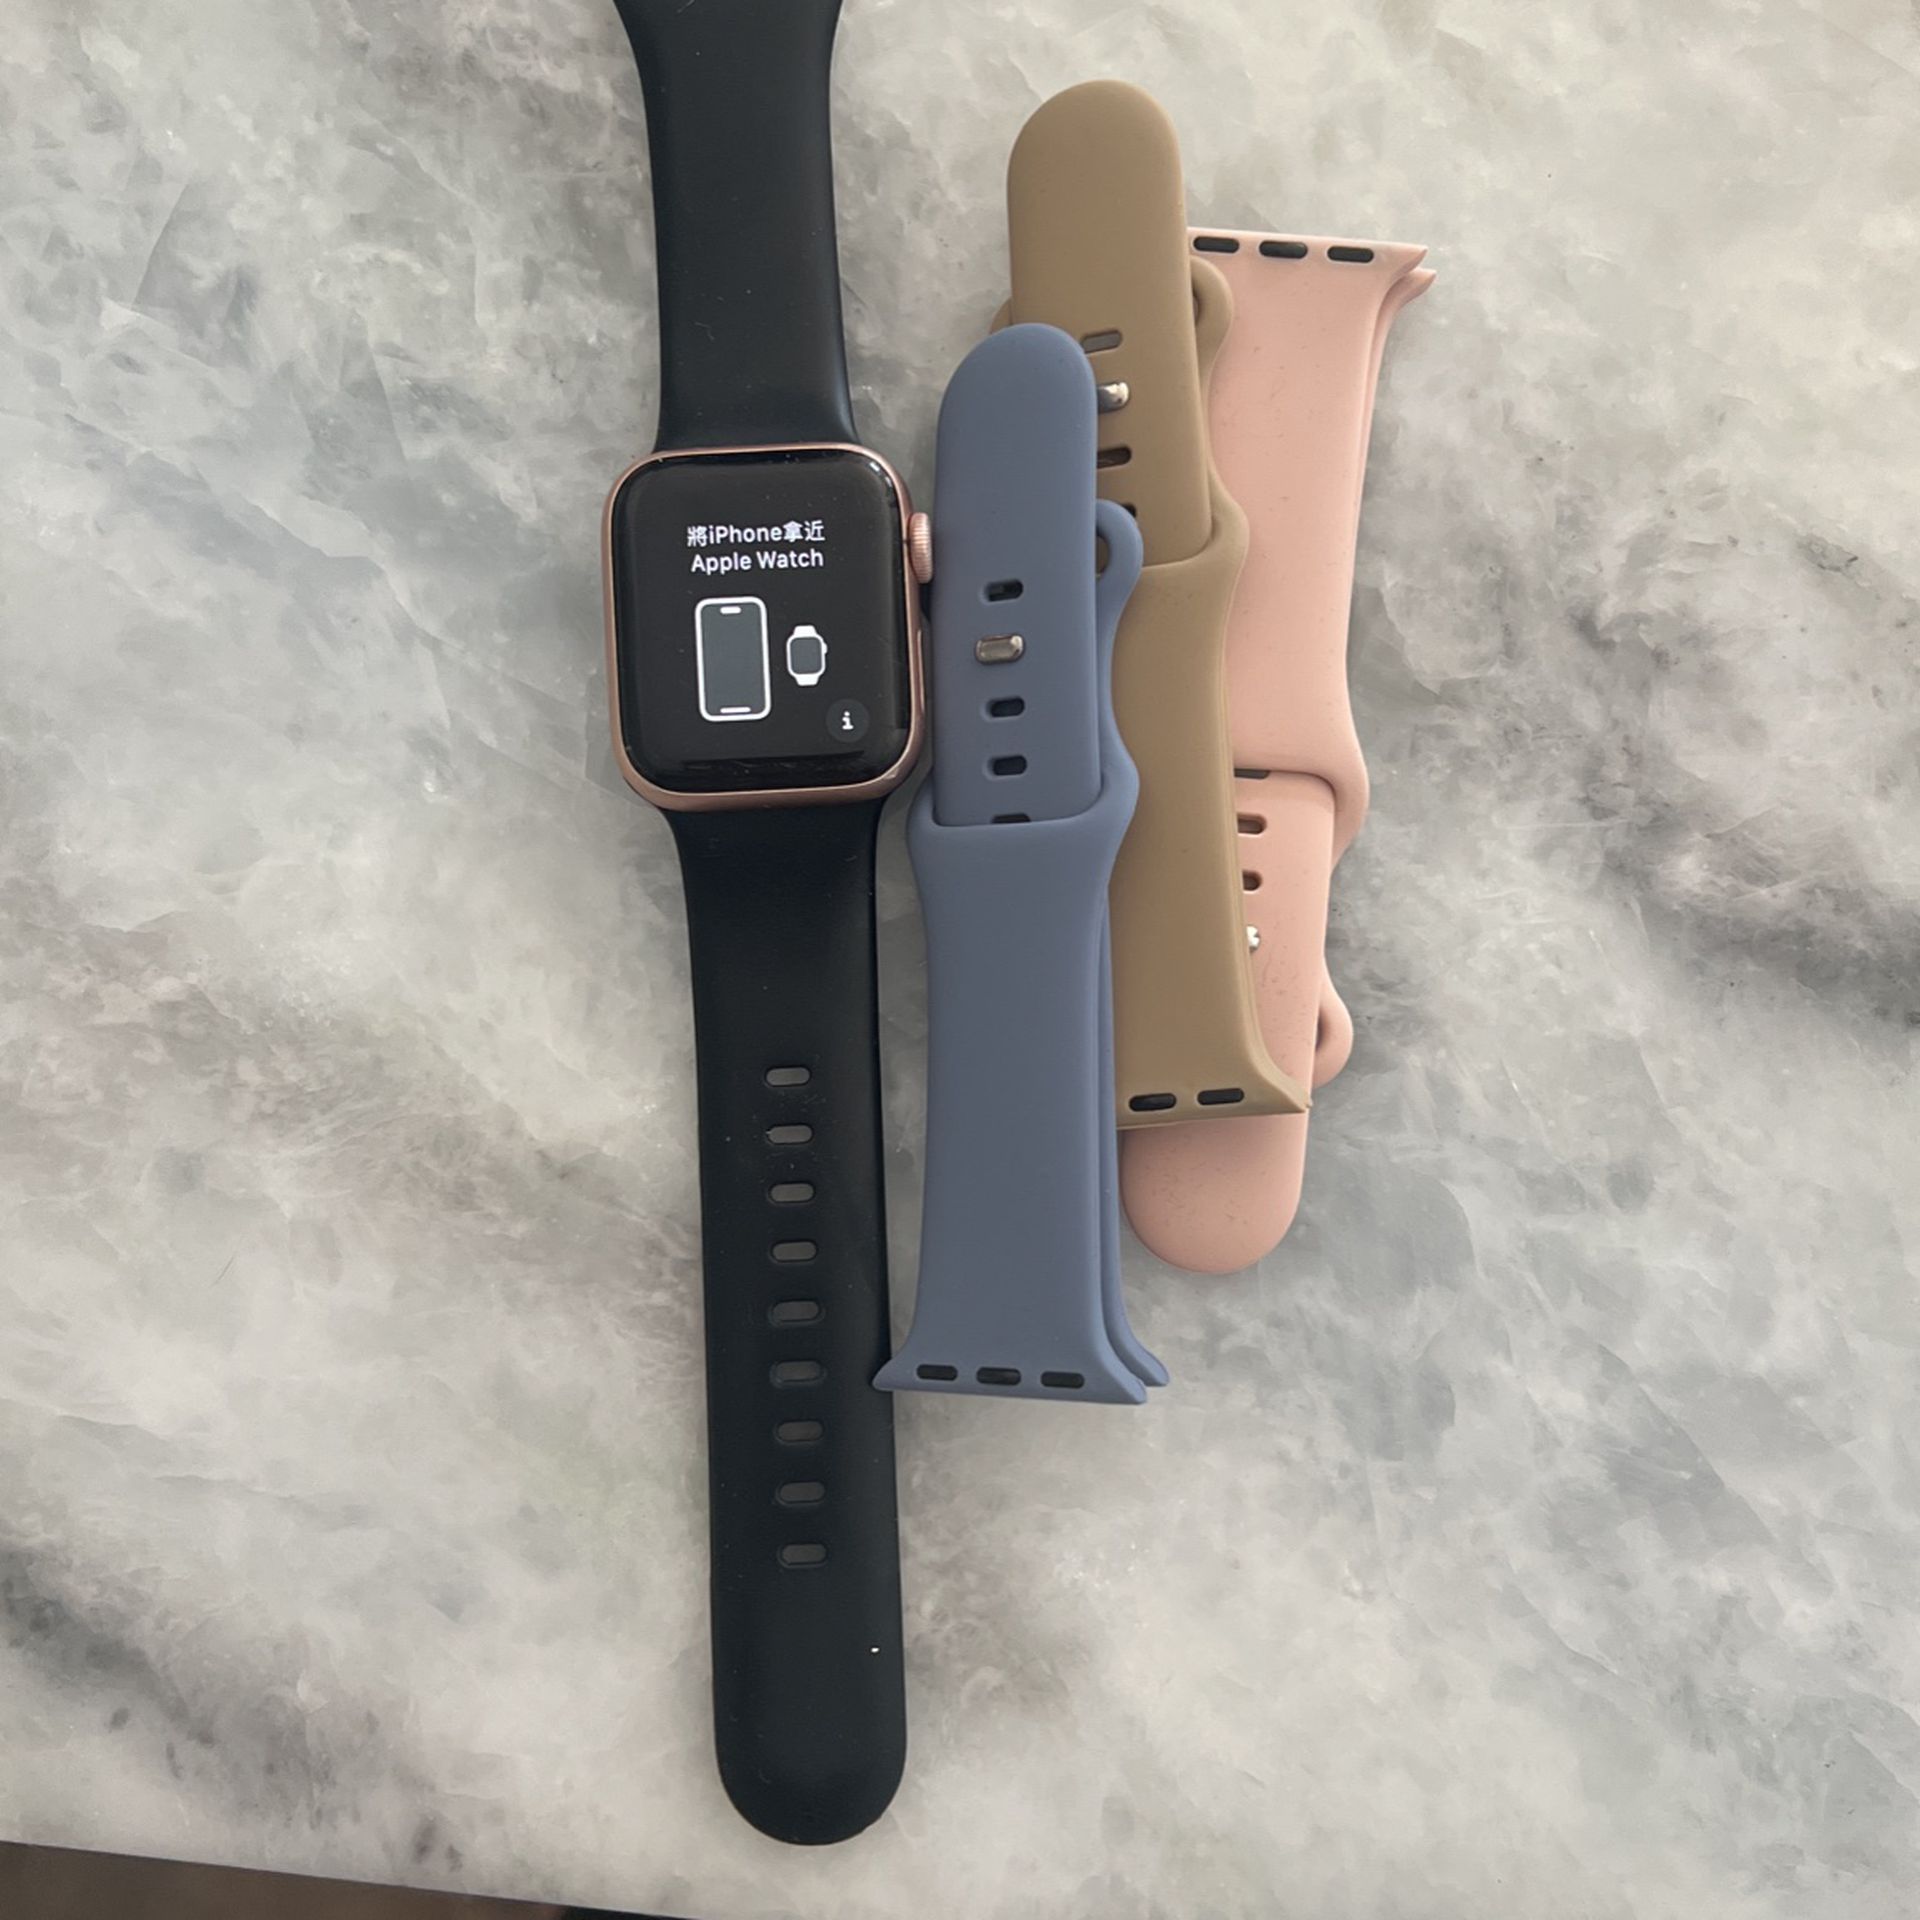 Series 5 Apple Watch Working With New Bands Included 